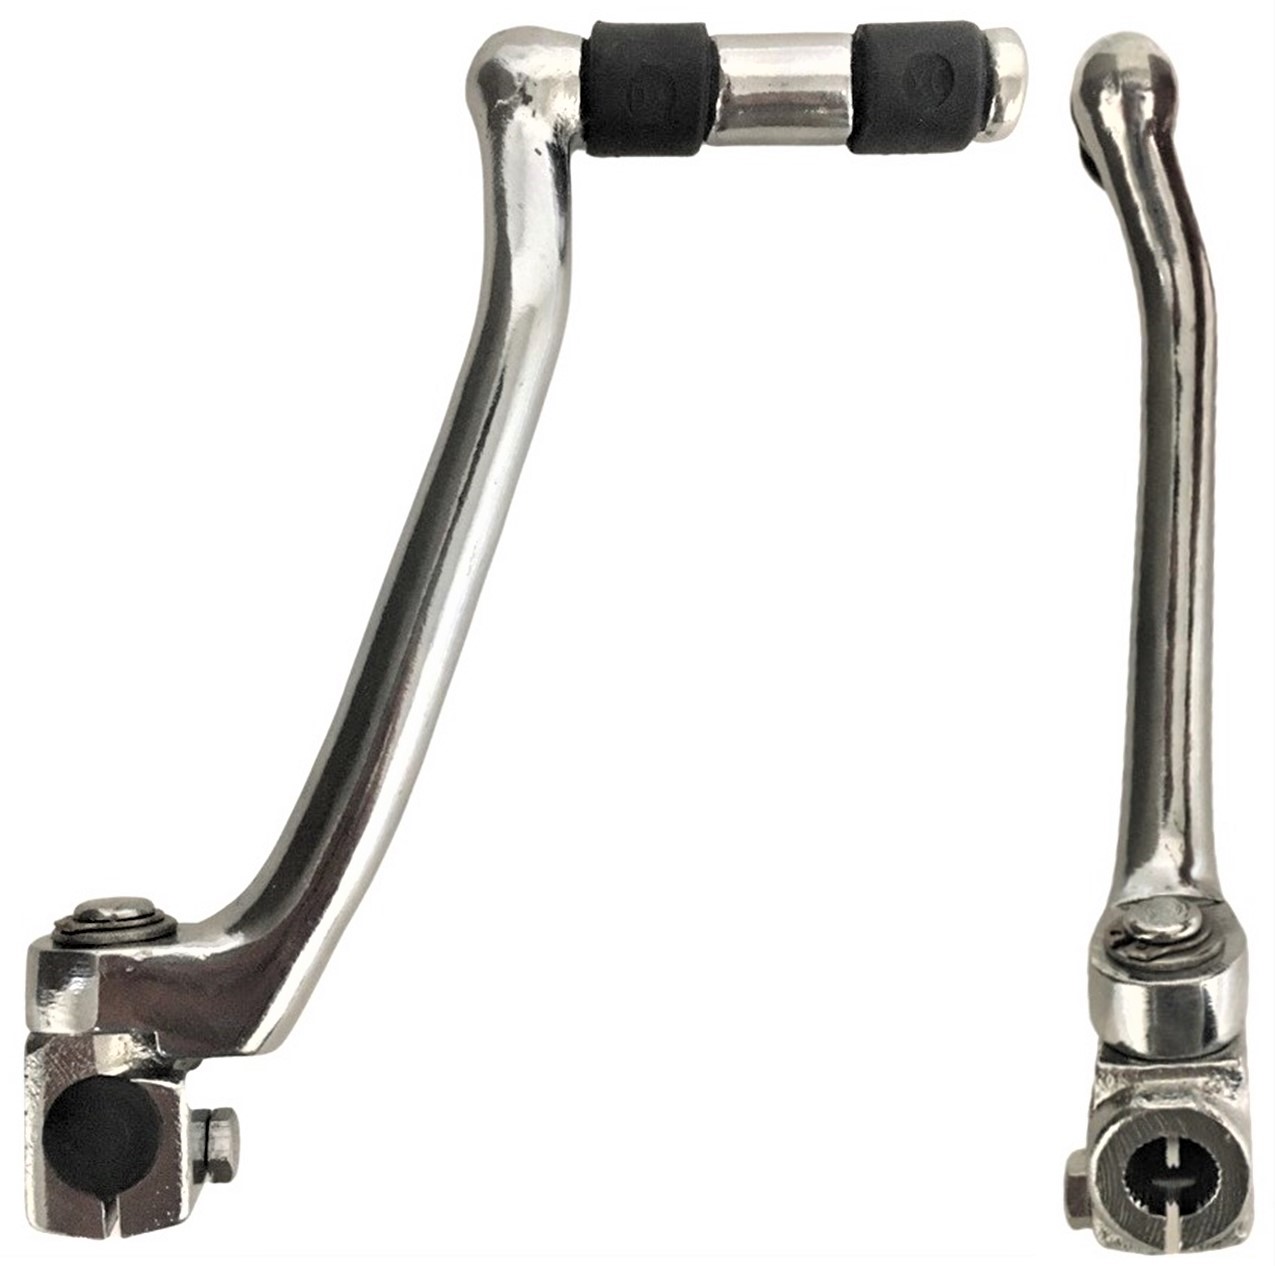 KICK START LEVER (Right Hand) DIRT BIKE Note - Color shipped may be Chrome or Black depending on availablity. ID=13mm L=7.5 in